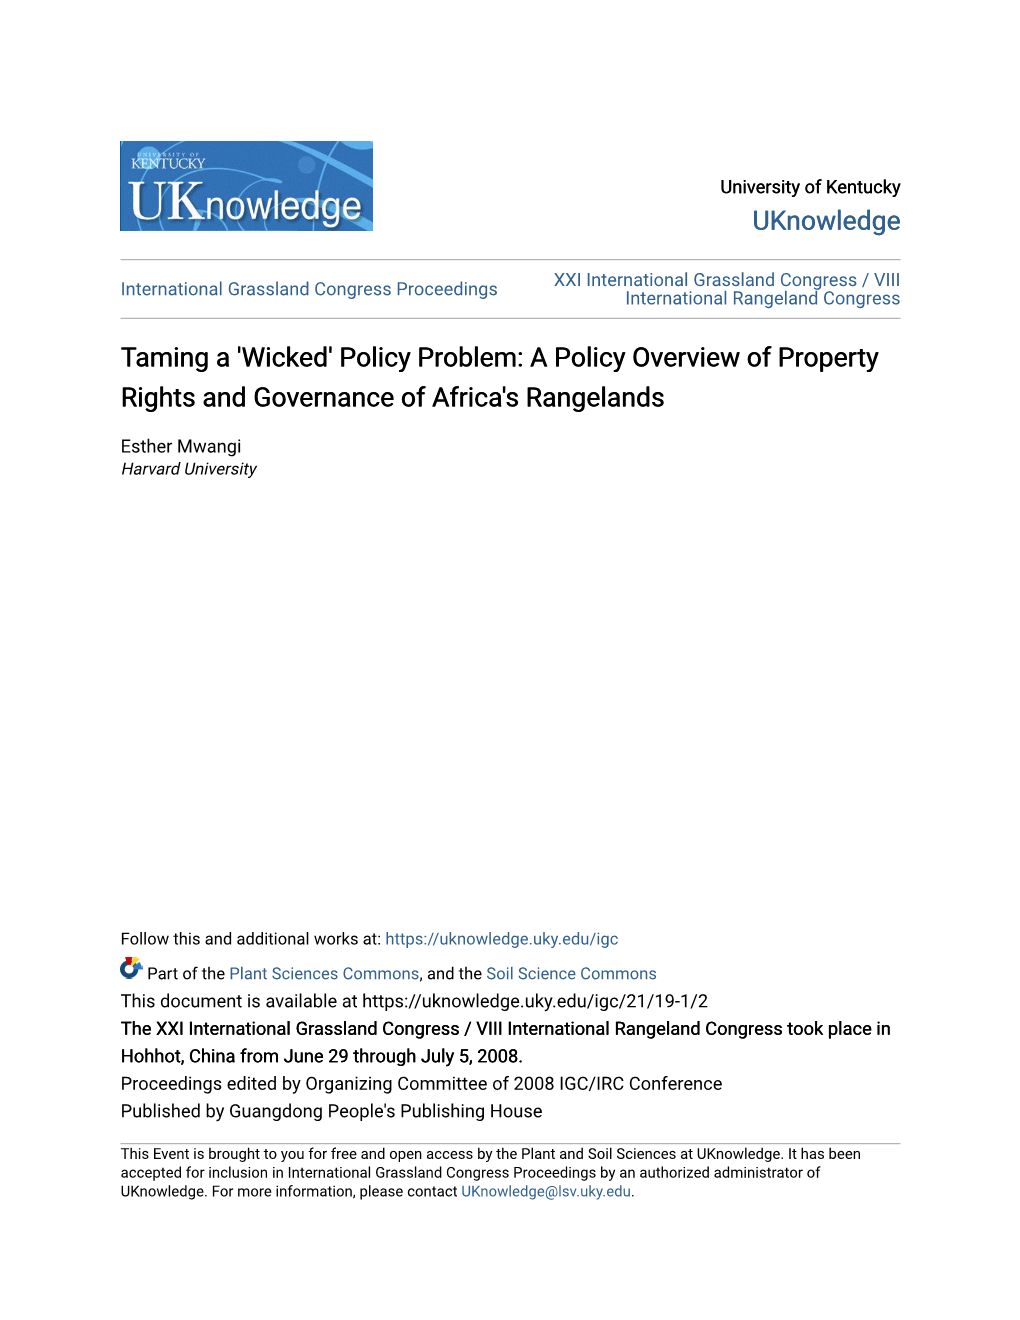 A Policy Overview of Property Rights and Governance of Africa's Rangelands